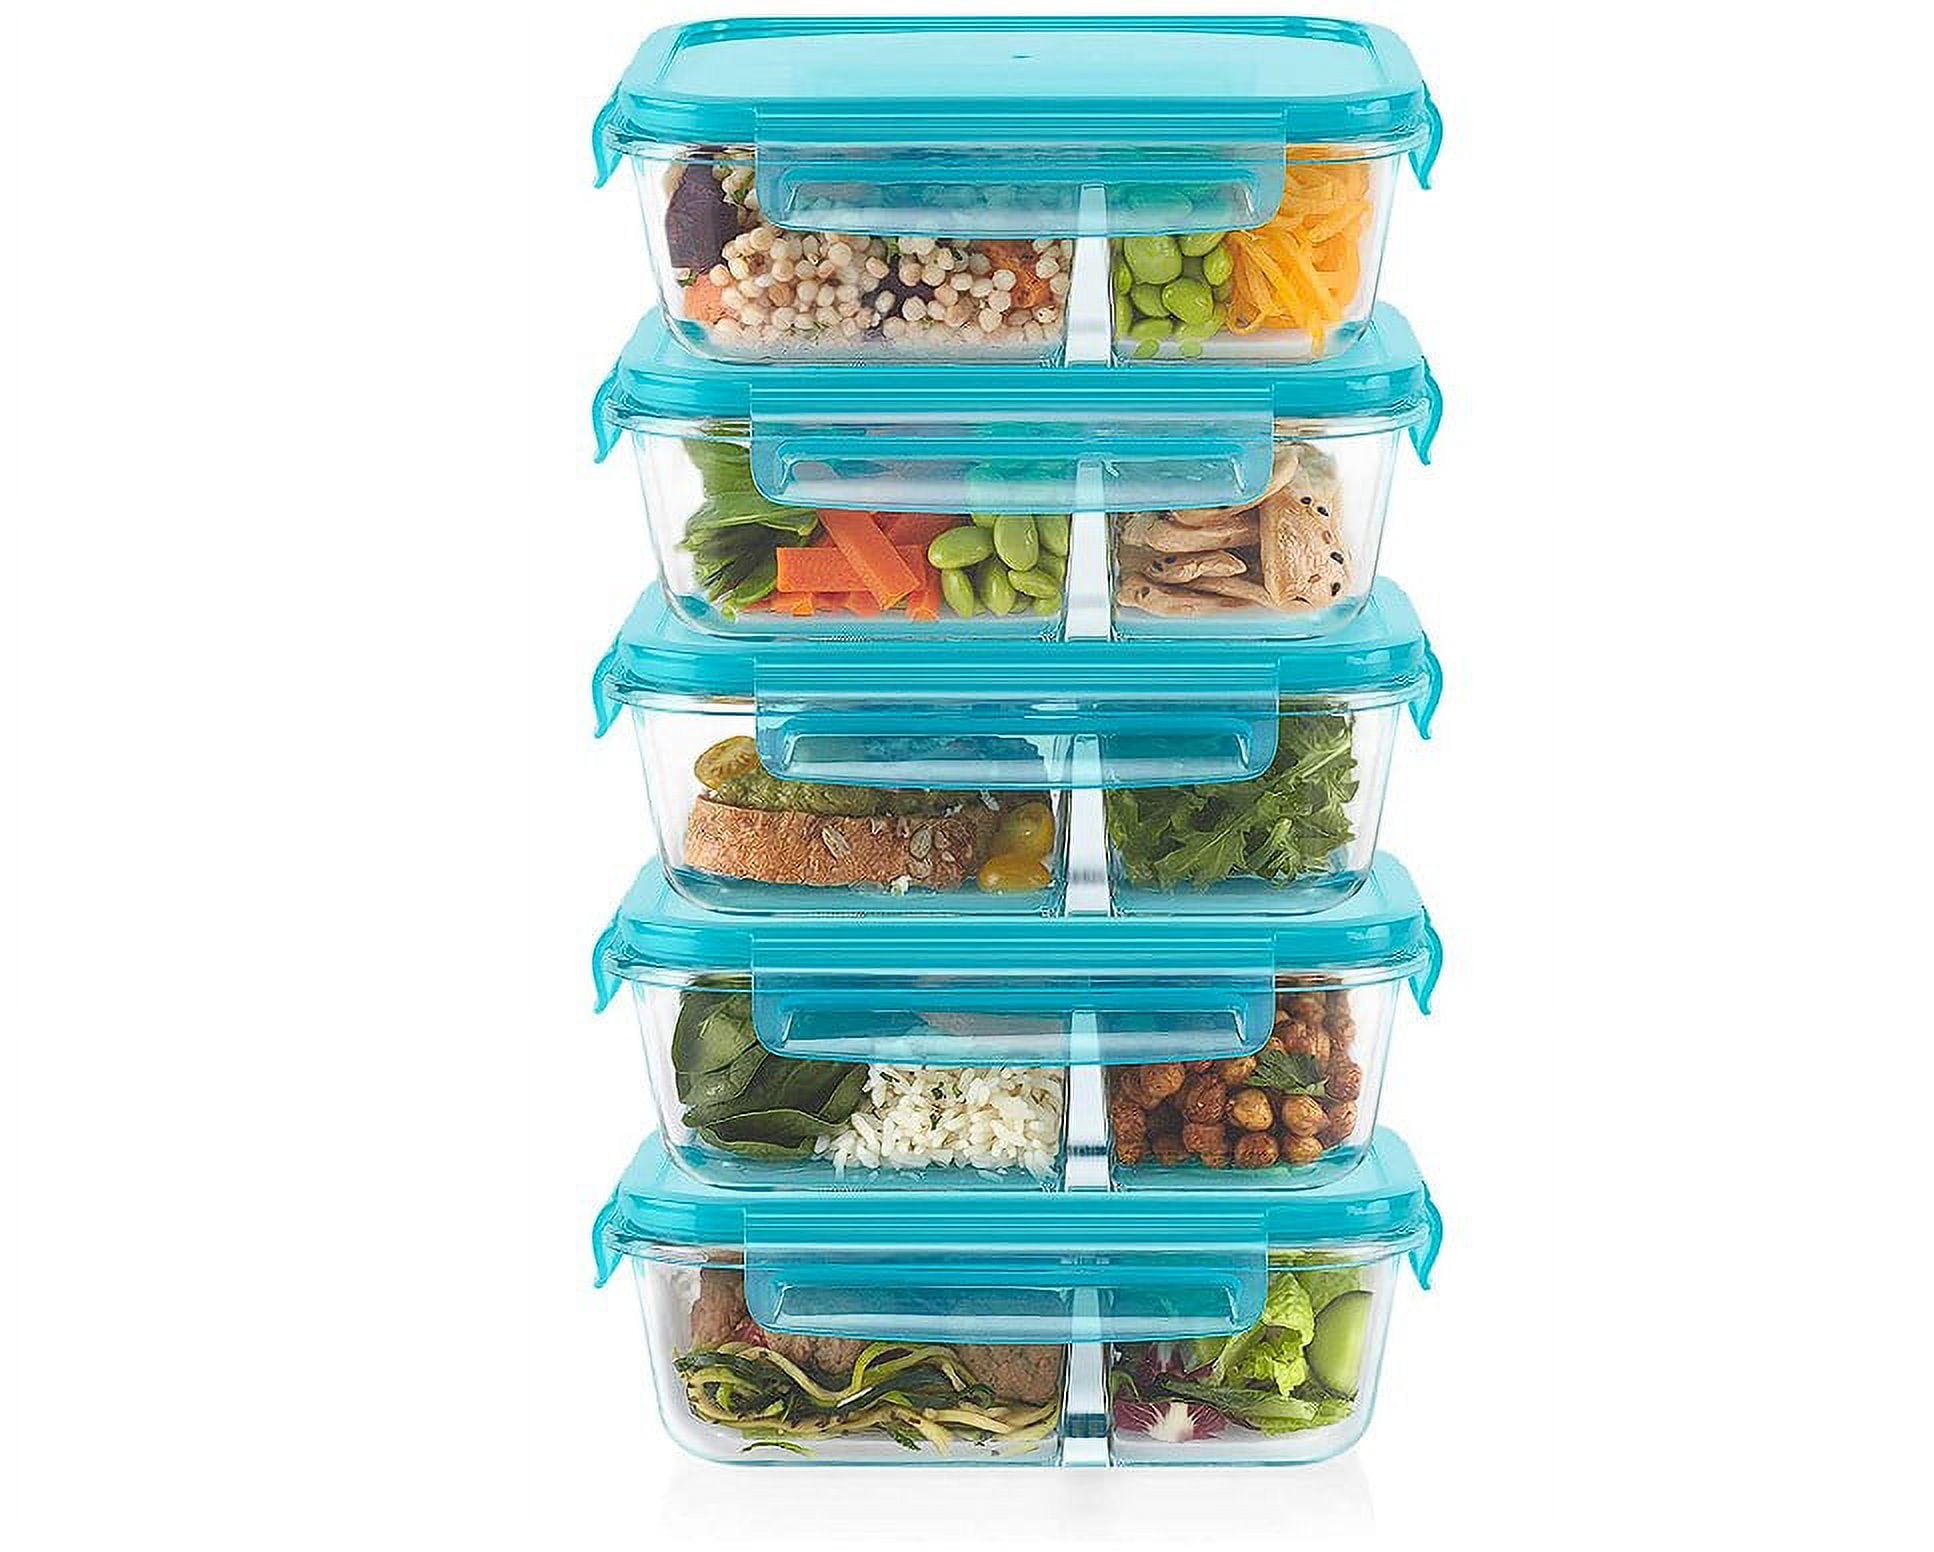  Pyrex Mealbox 10-Pc Bento Box Set, 2.3-Cup Divided Glass Food  Storage Containers Set, Non-Toxic, BPA-Free Latching Lids, Freezer,  Microwave and Top-Rack Dishwasher Safe, Compartment Bento Lunch Box: Home &  Kitchen